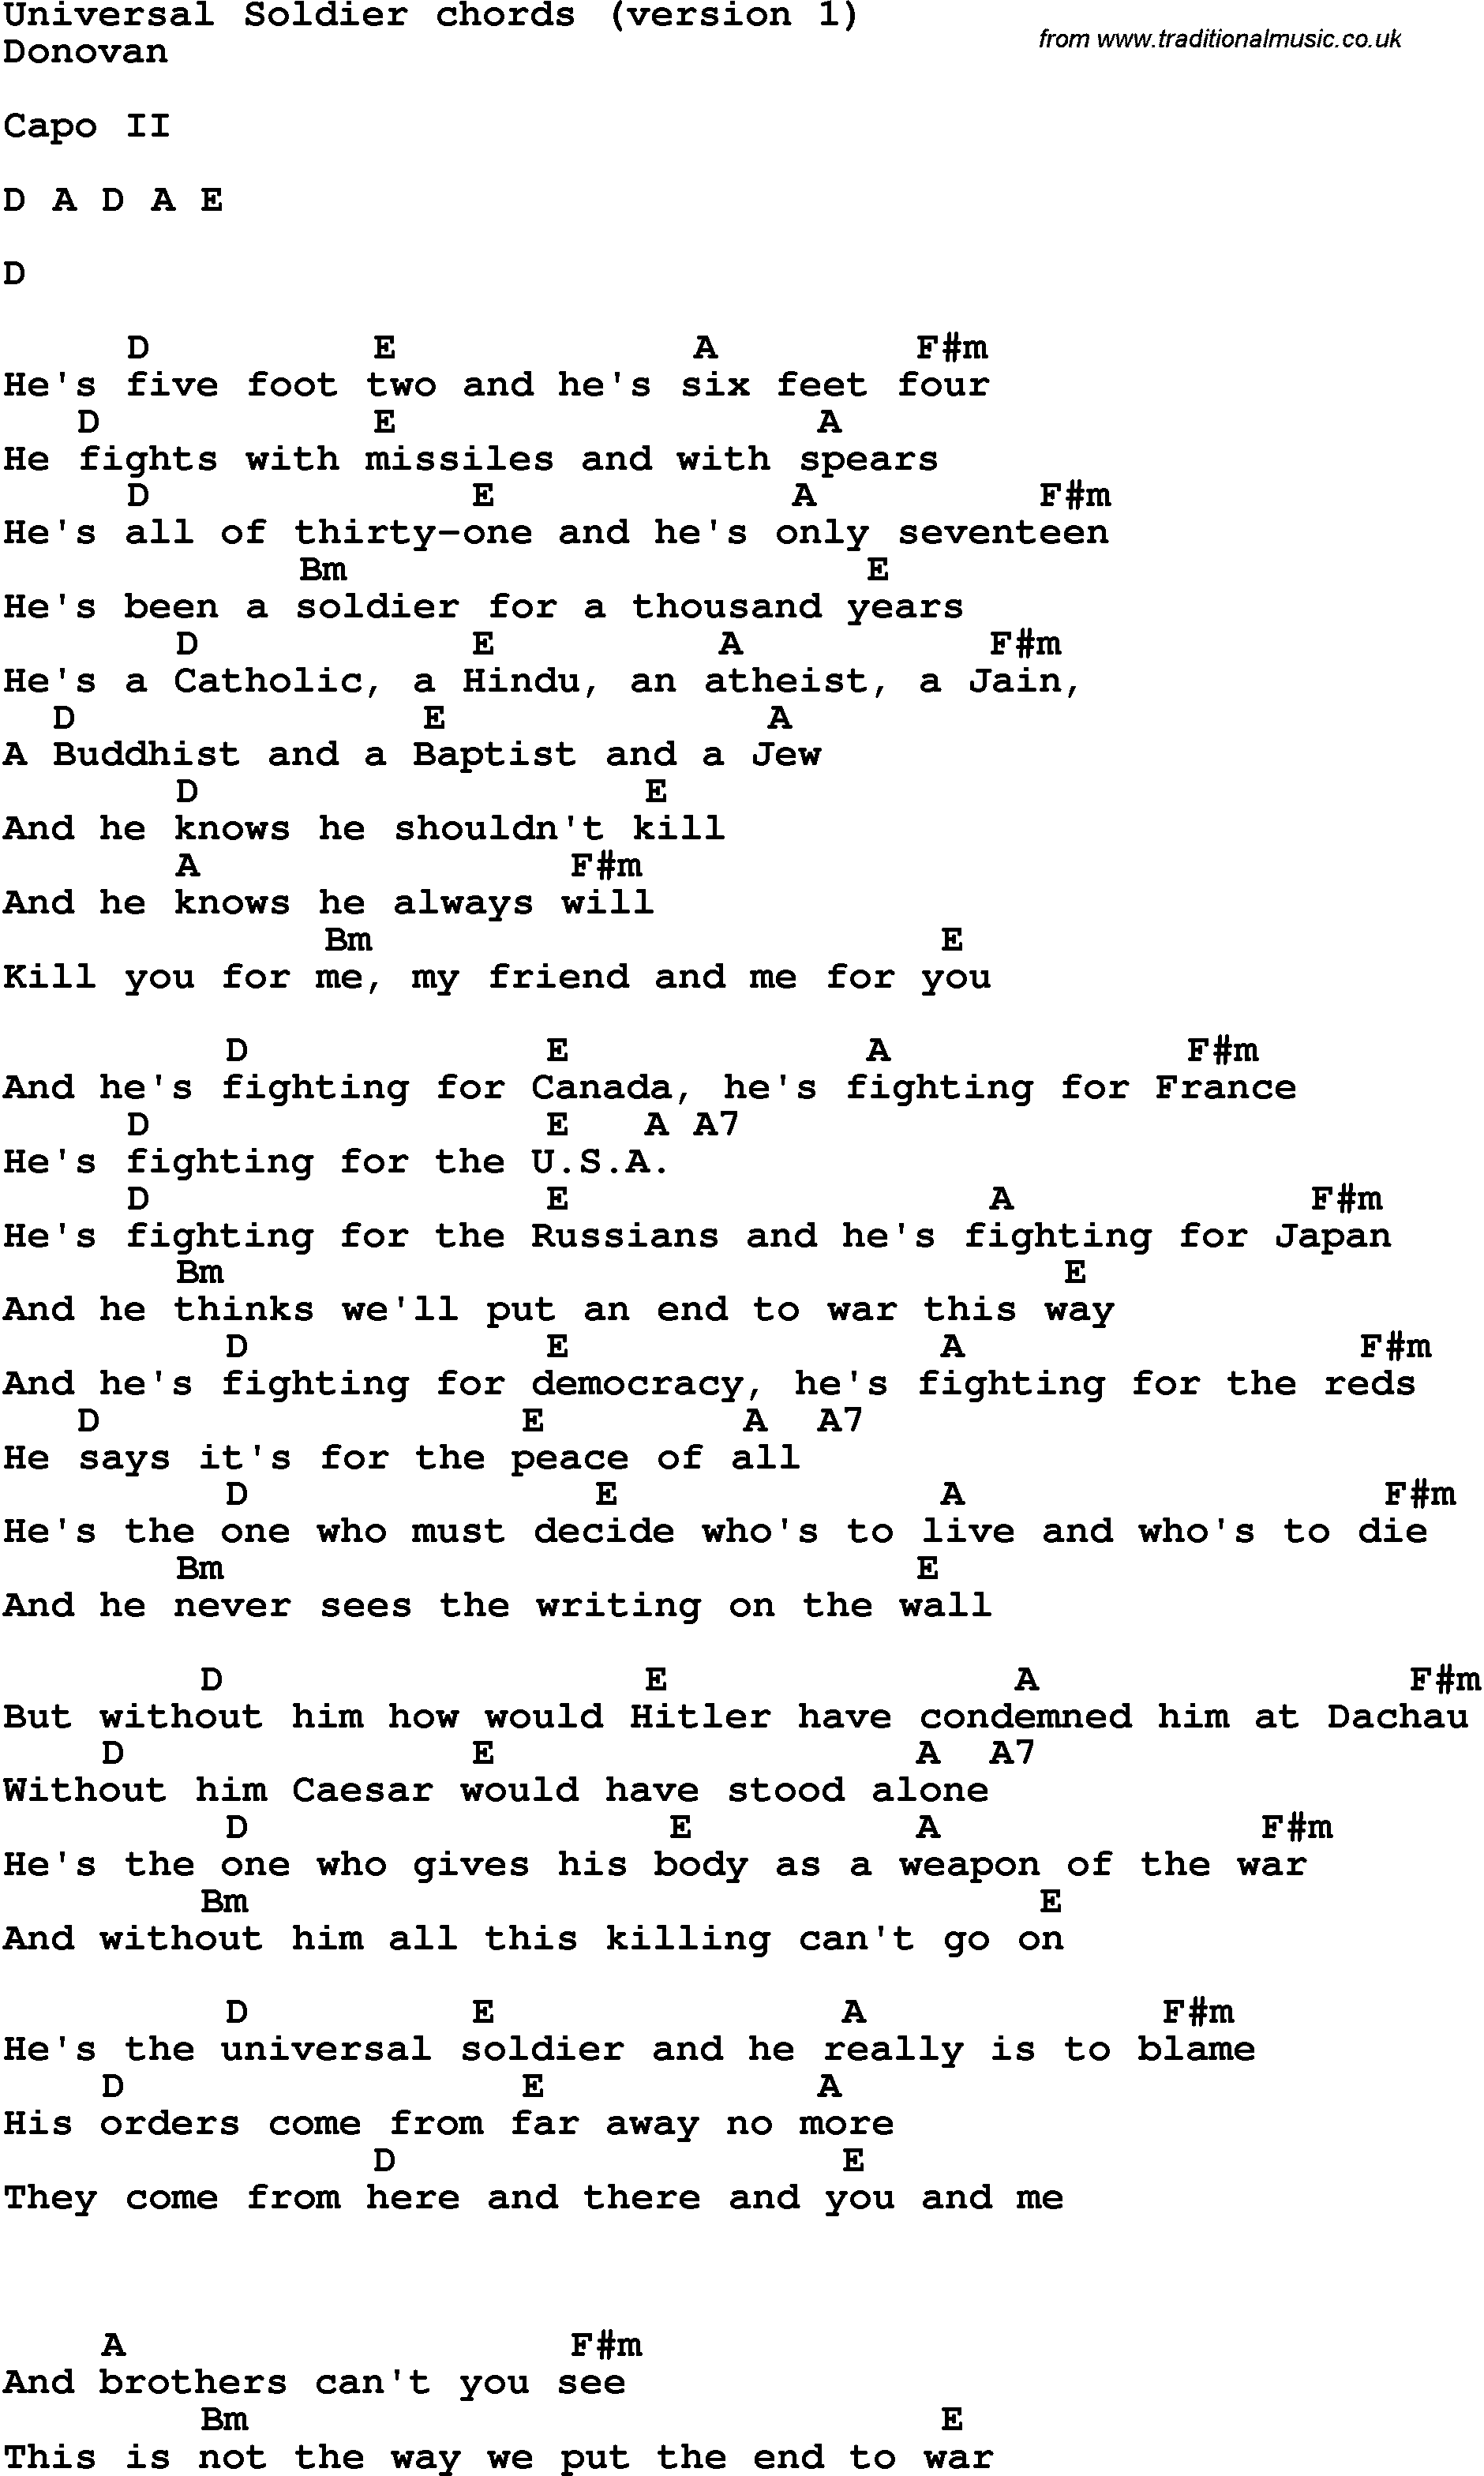 Song Lyrics with guitar chords for Universal Soldier